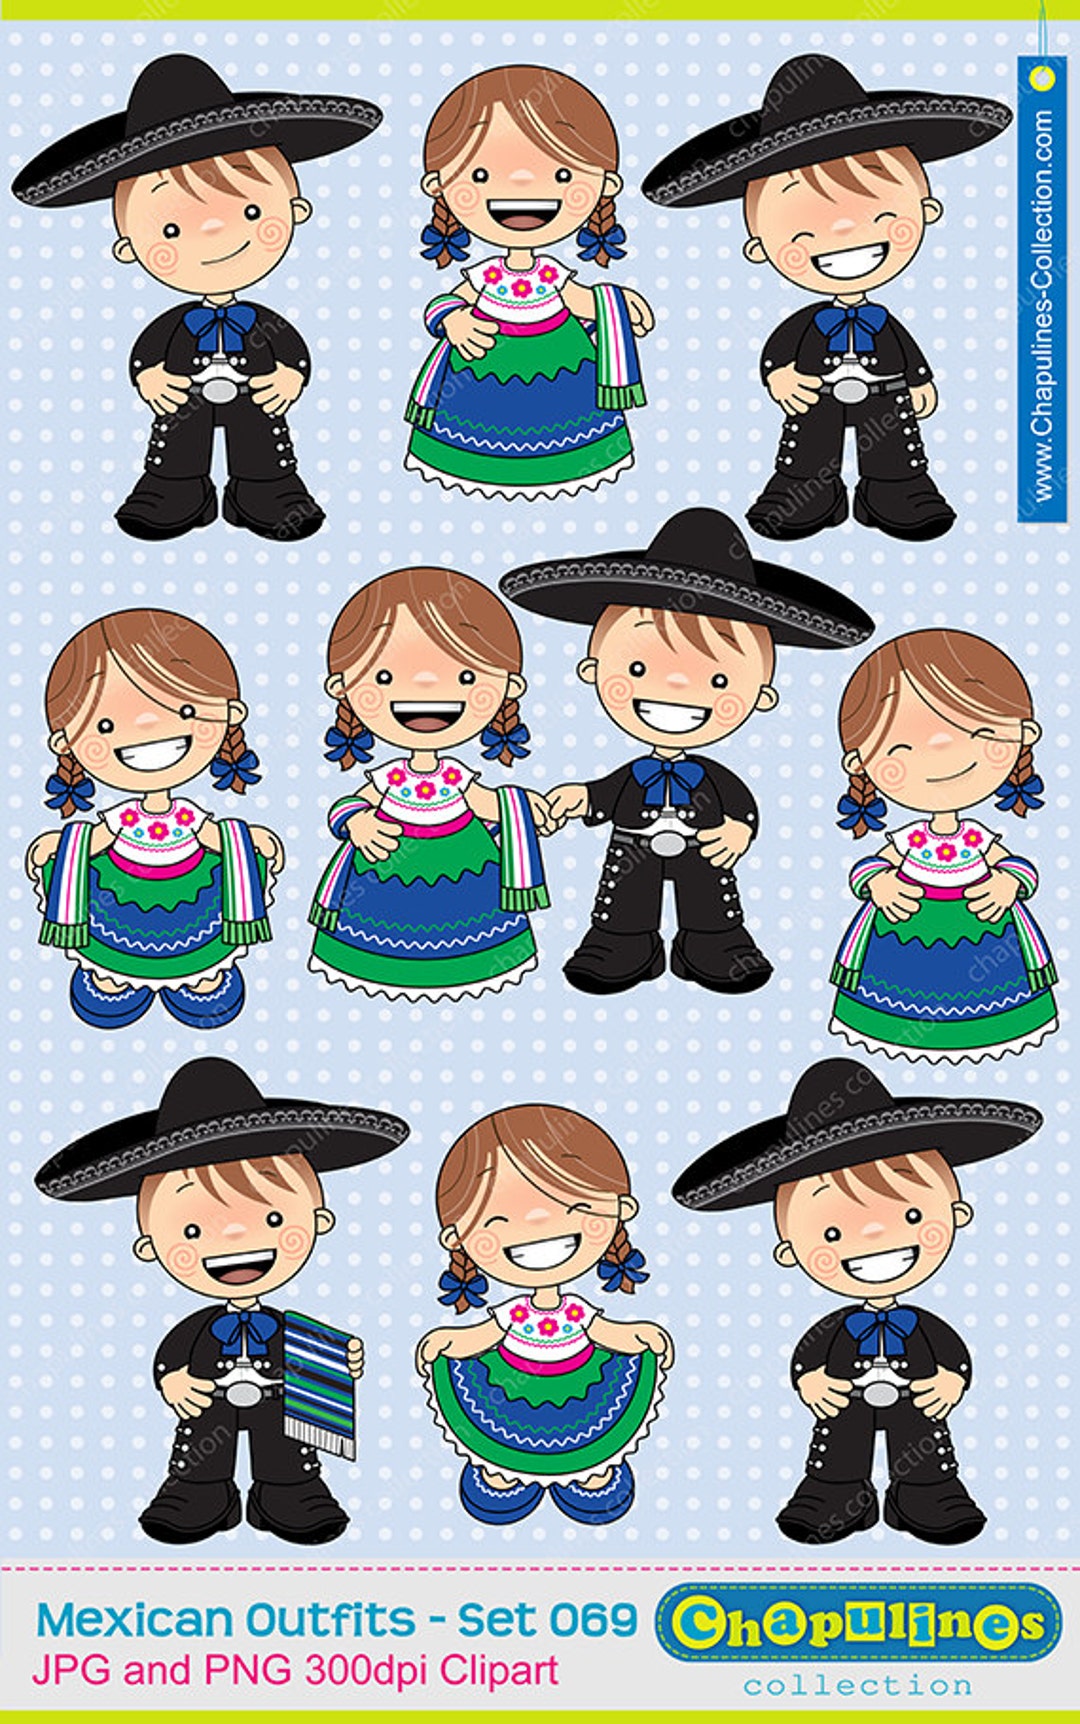 Mexican Outfits Clipart China Poblana and Charro Kids - Etsy